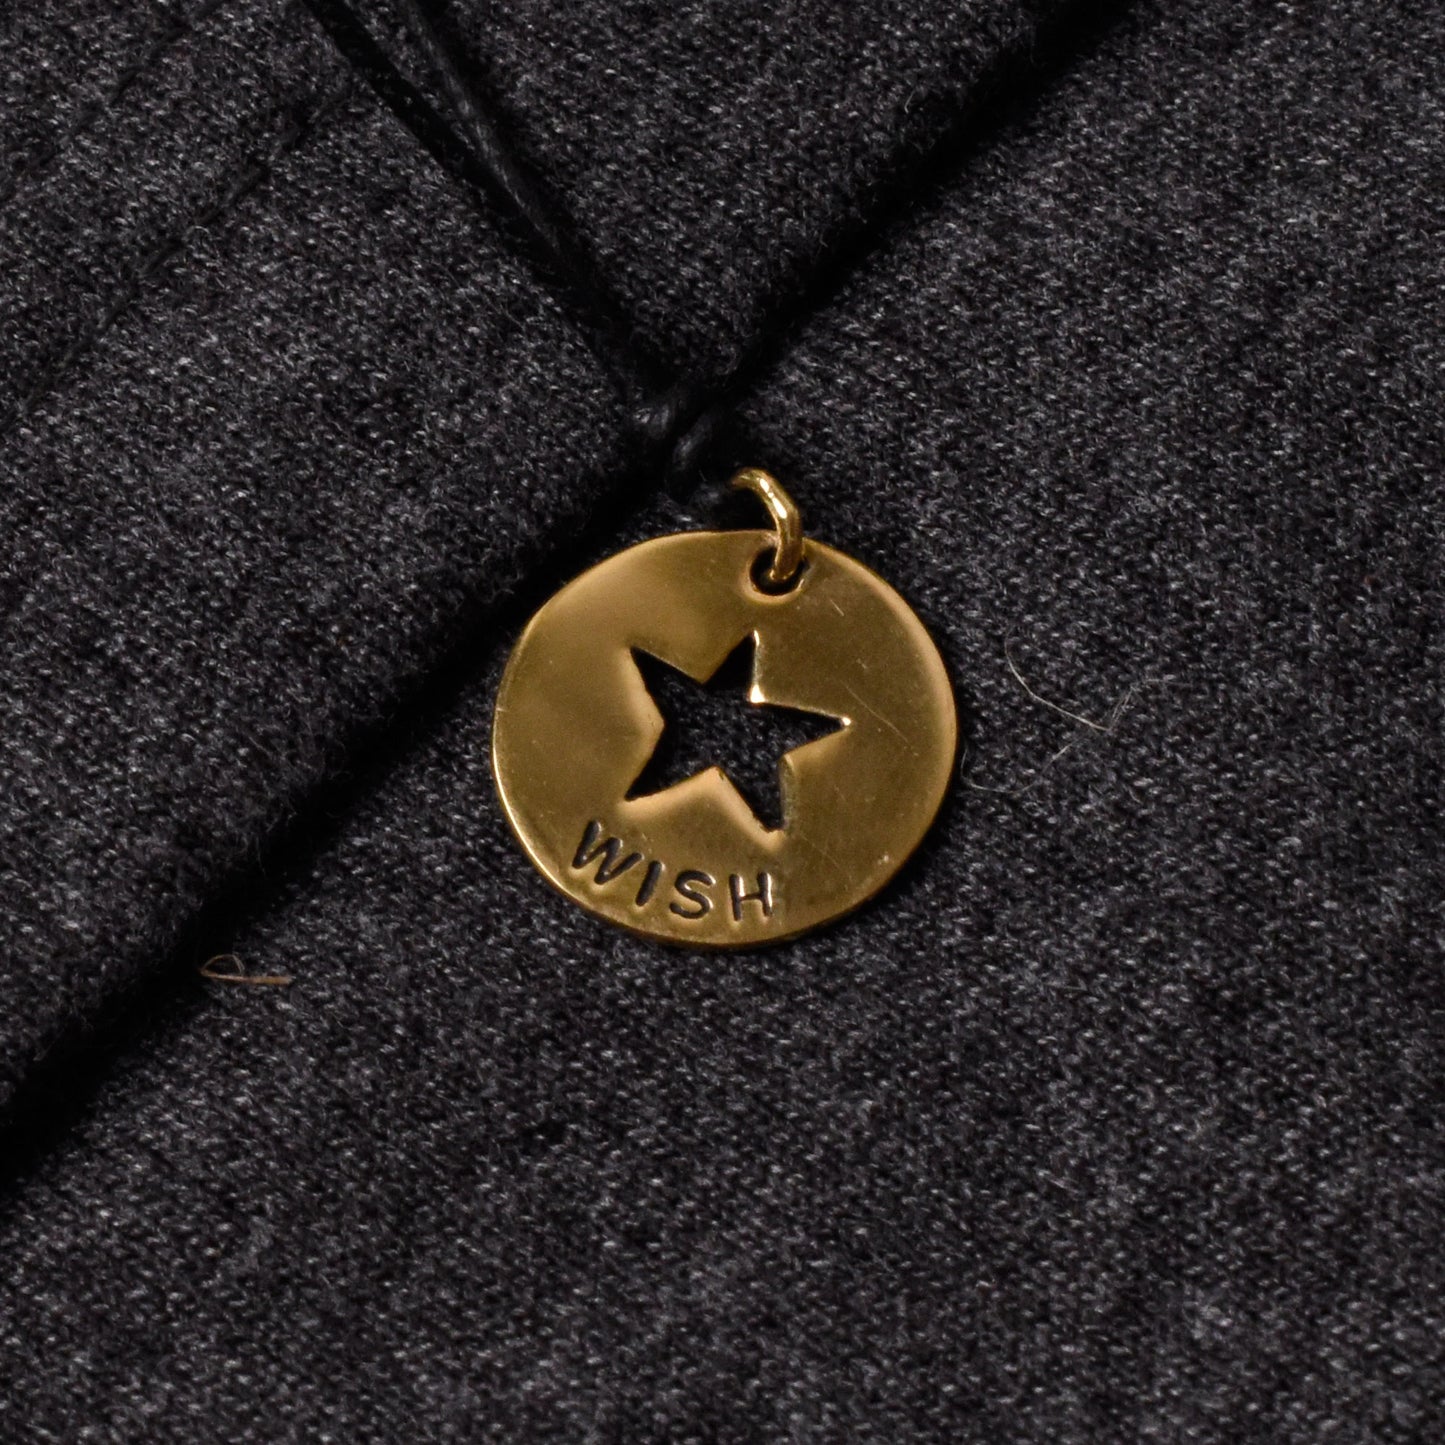 Star Wish Gold Brass Charm Necklace Pendant Jewelry With Cotton Cord